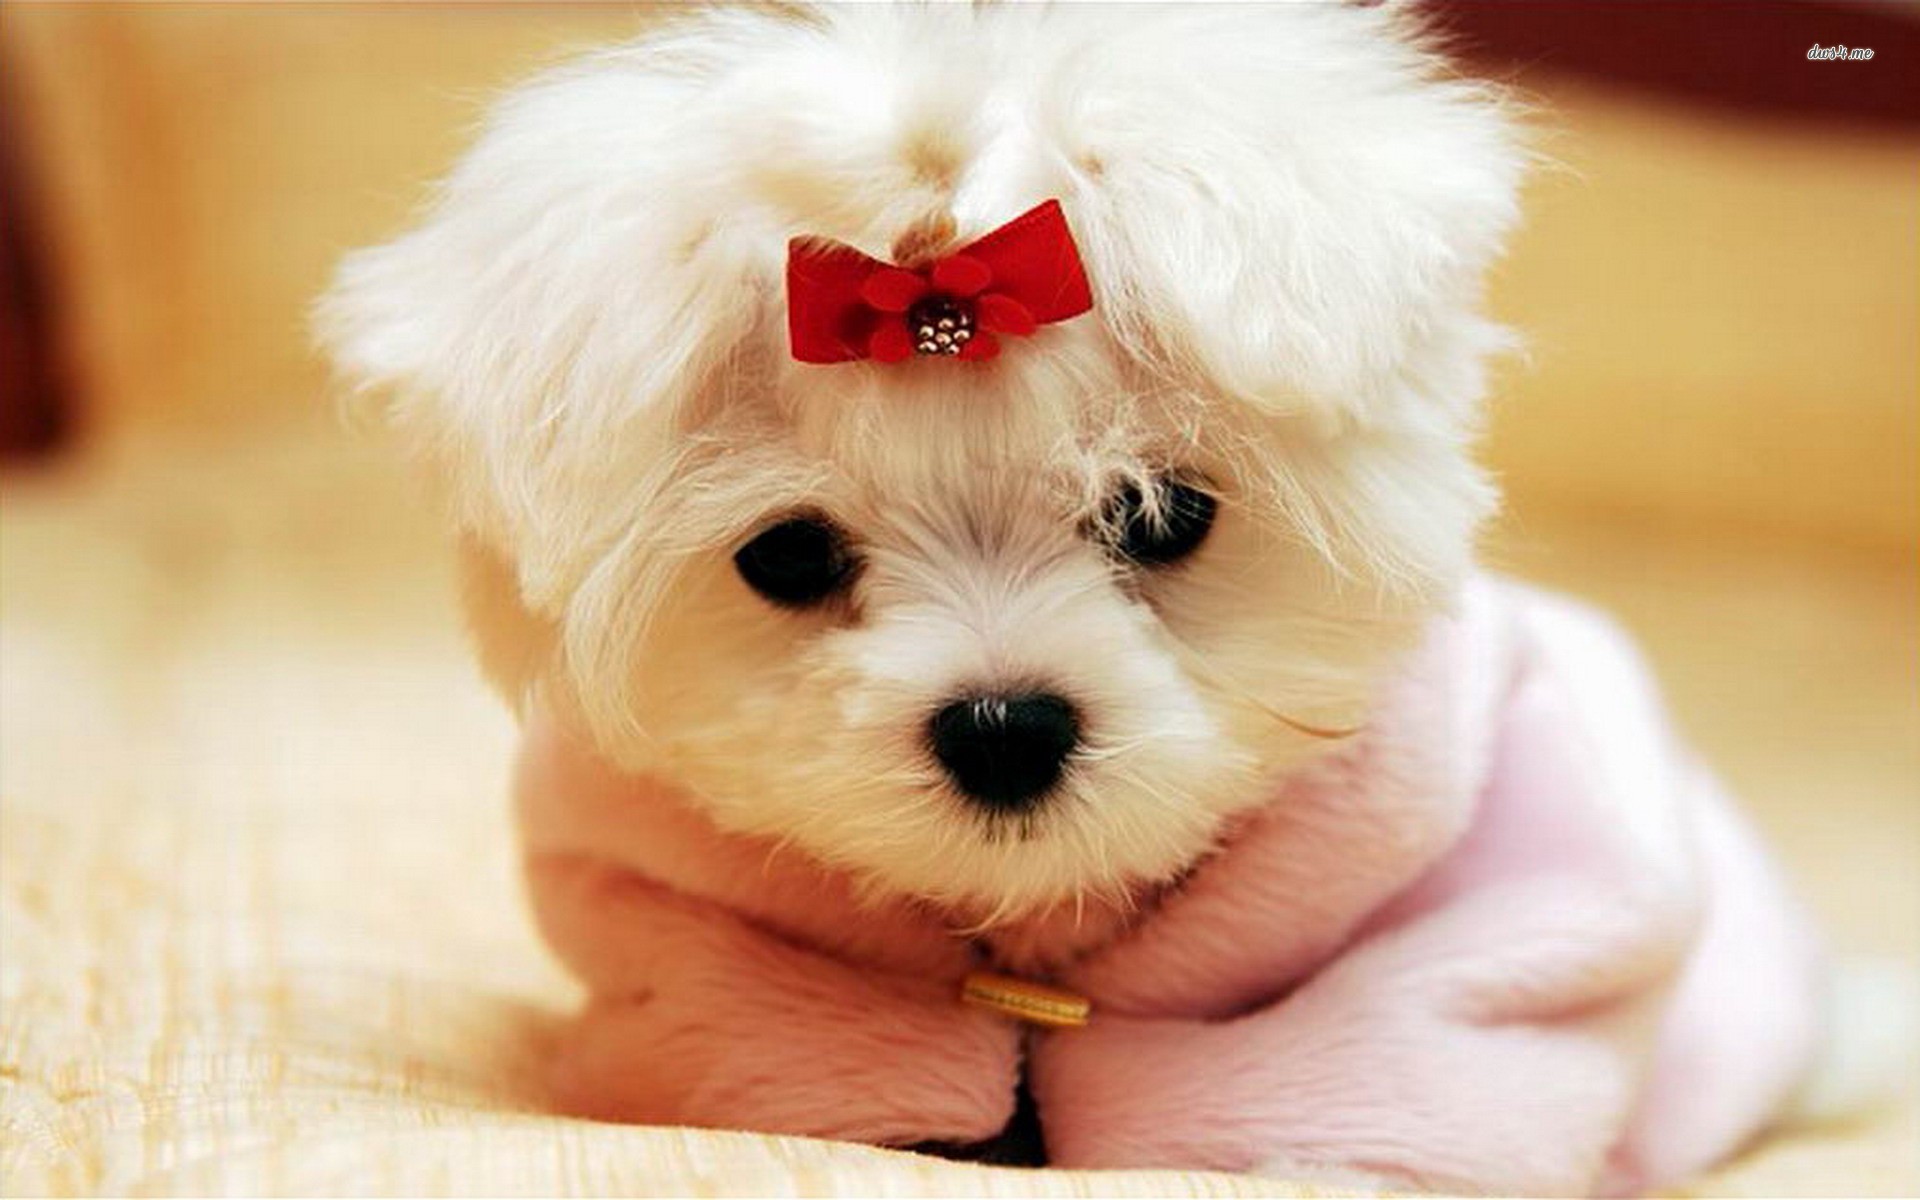 78+ ideas about Cute Puppy Wallpaper on Pinterest | Cute puppies